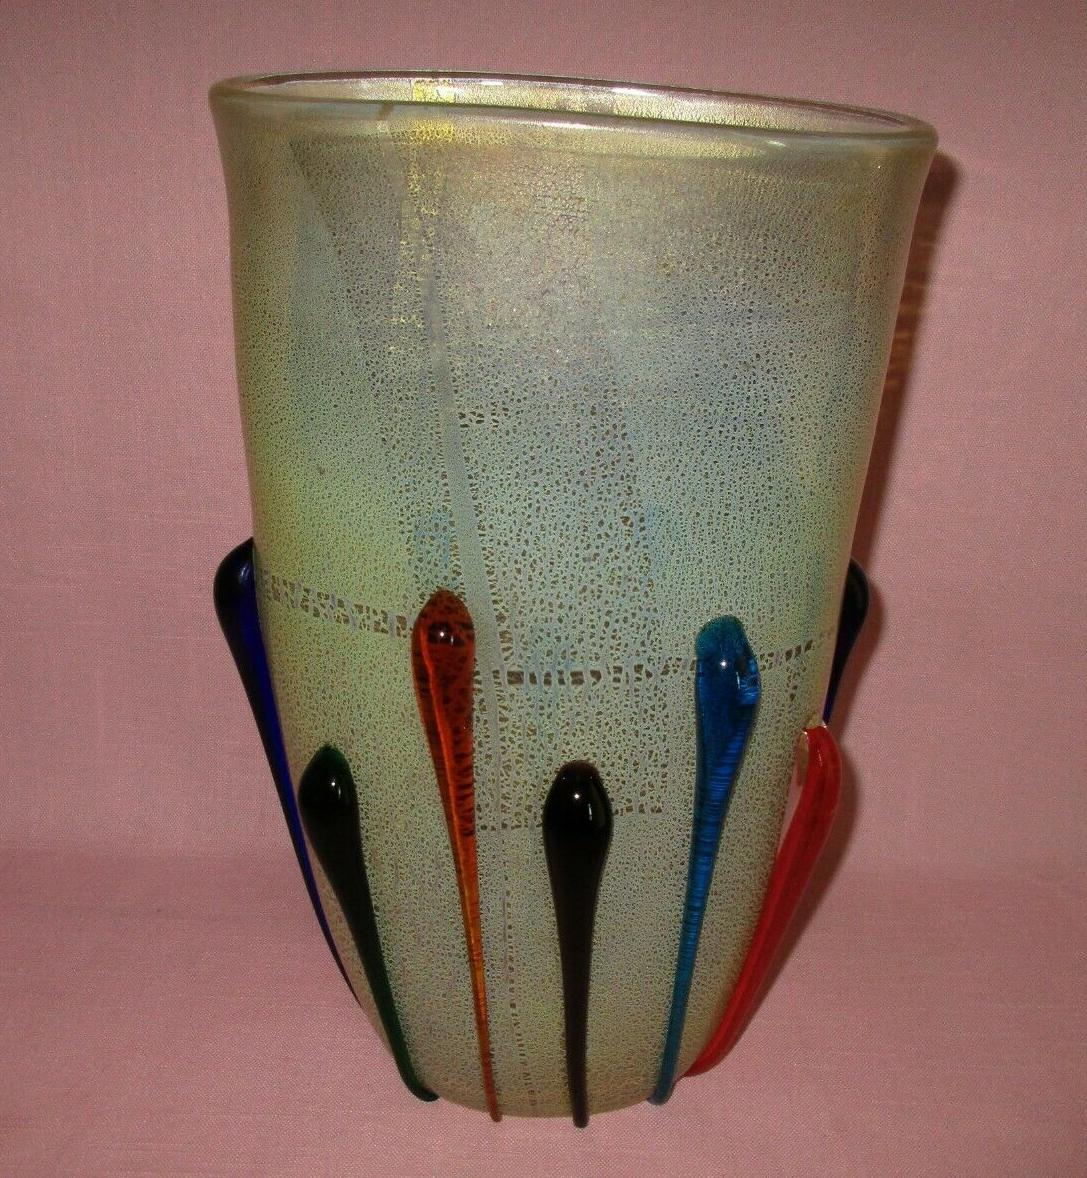 For the lovers of Murano, a spectacular large art glass created and signed by Mario Mellora. Beautiful applied multi-color teardrop glass pieces, slight designs and slight gold flakes within the glass. The base is hand incised: Mario Mellora.